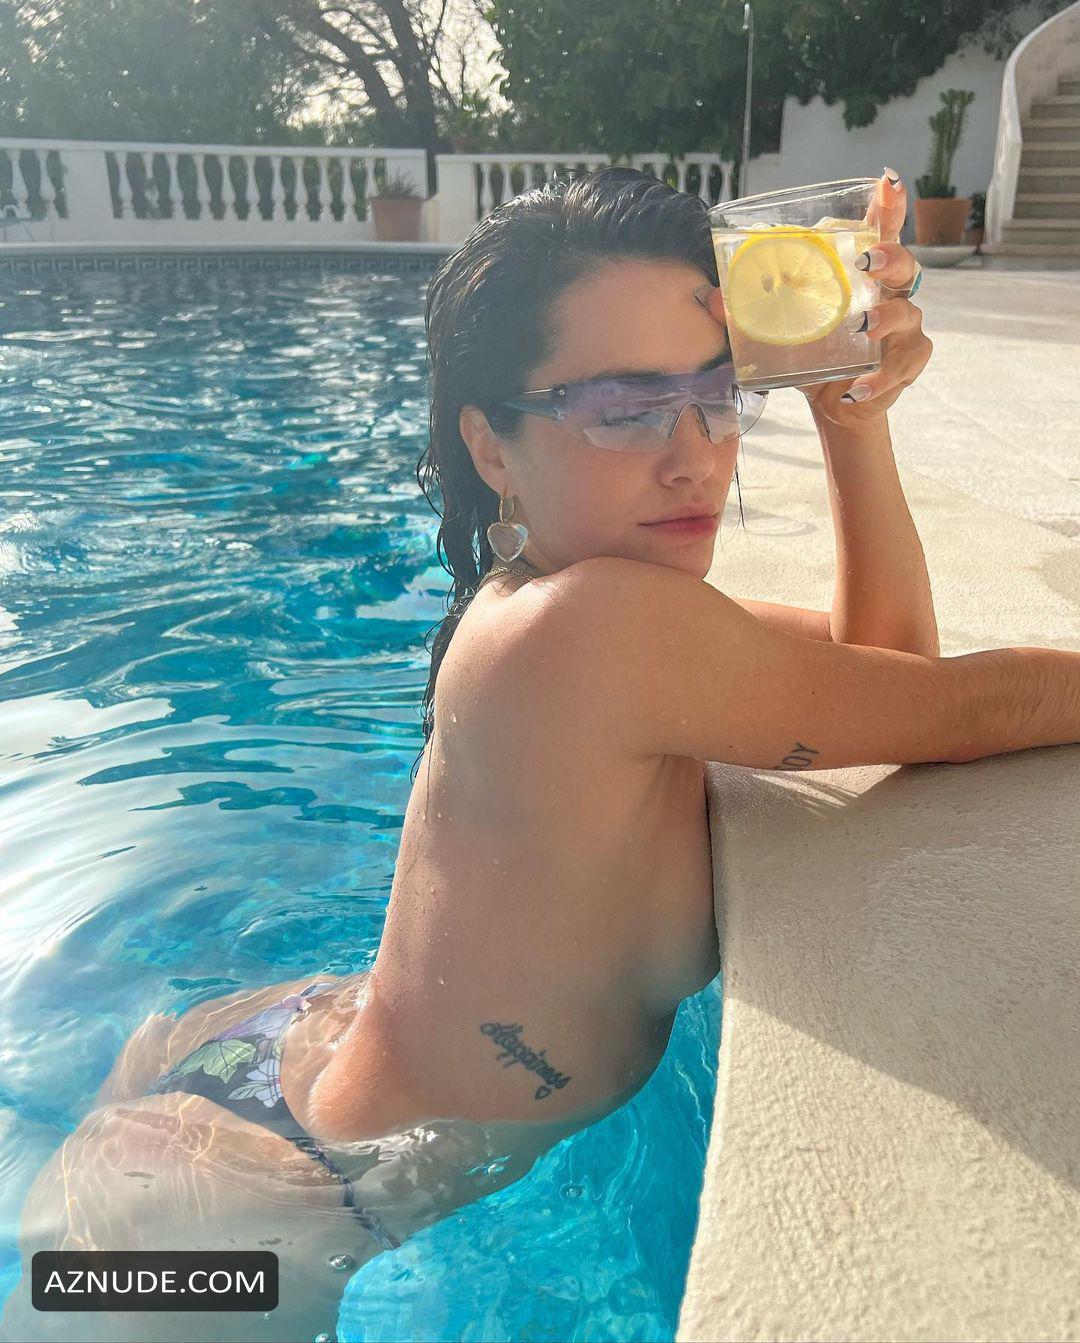 Lali Esposito Stunning Topless And Bikini Photos And Videos From Her Instagram Account Aznude